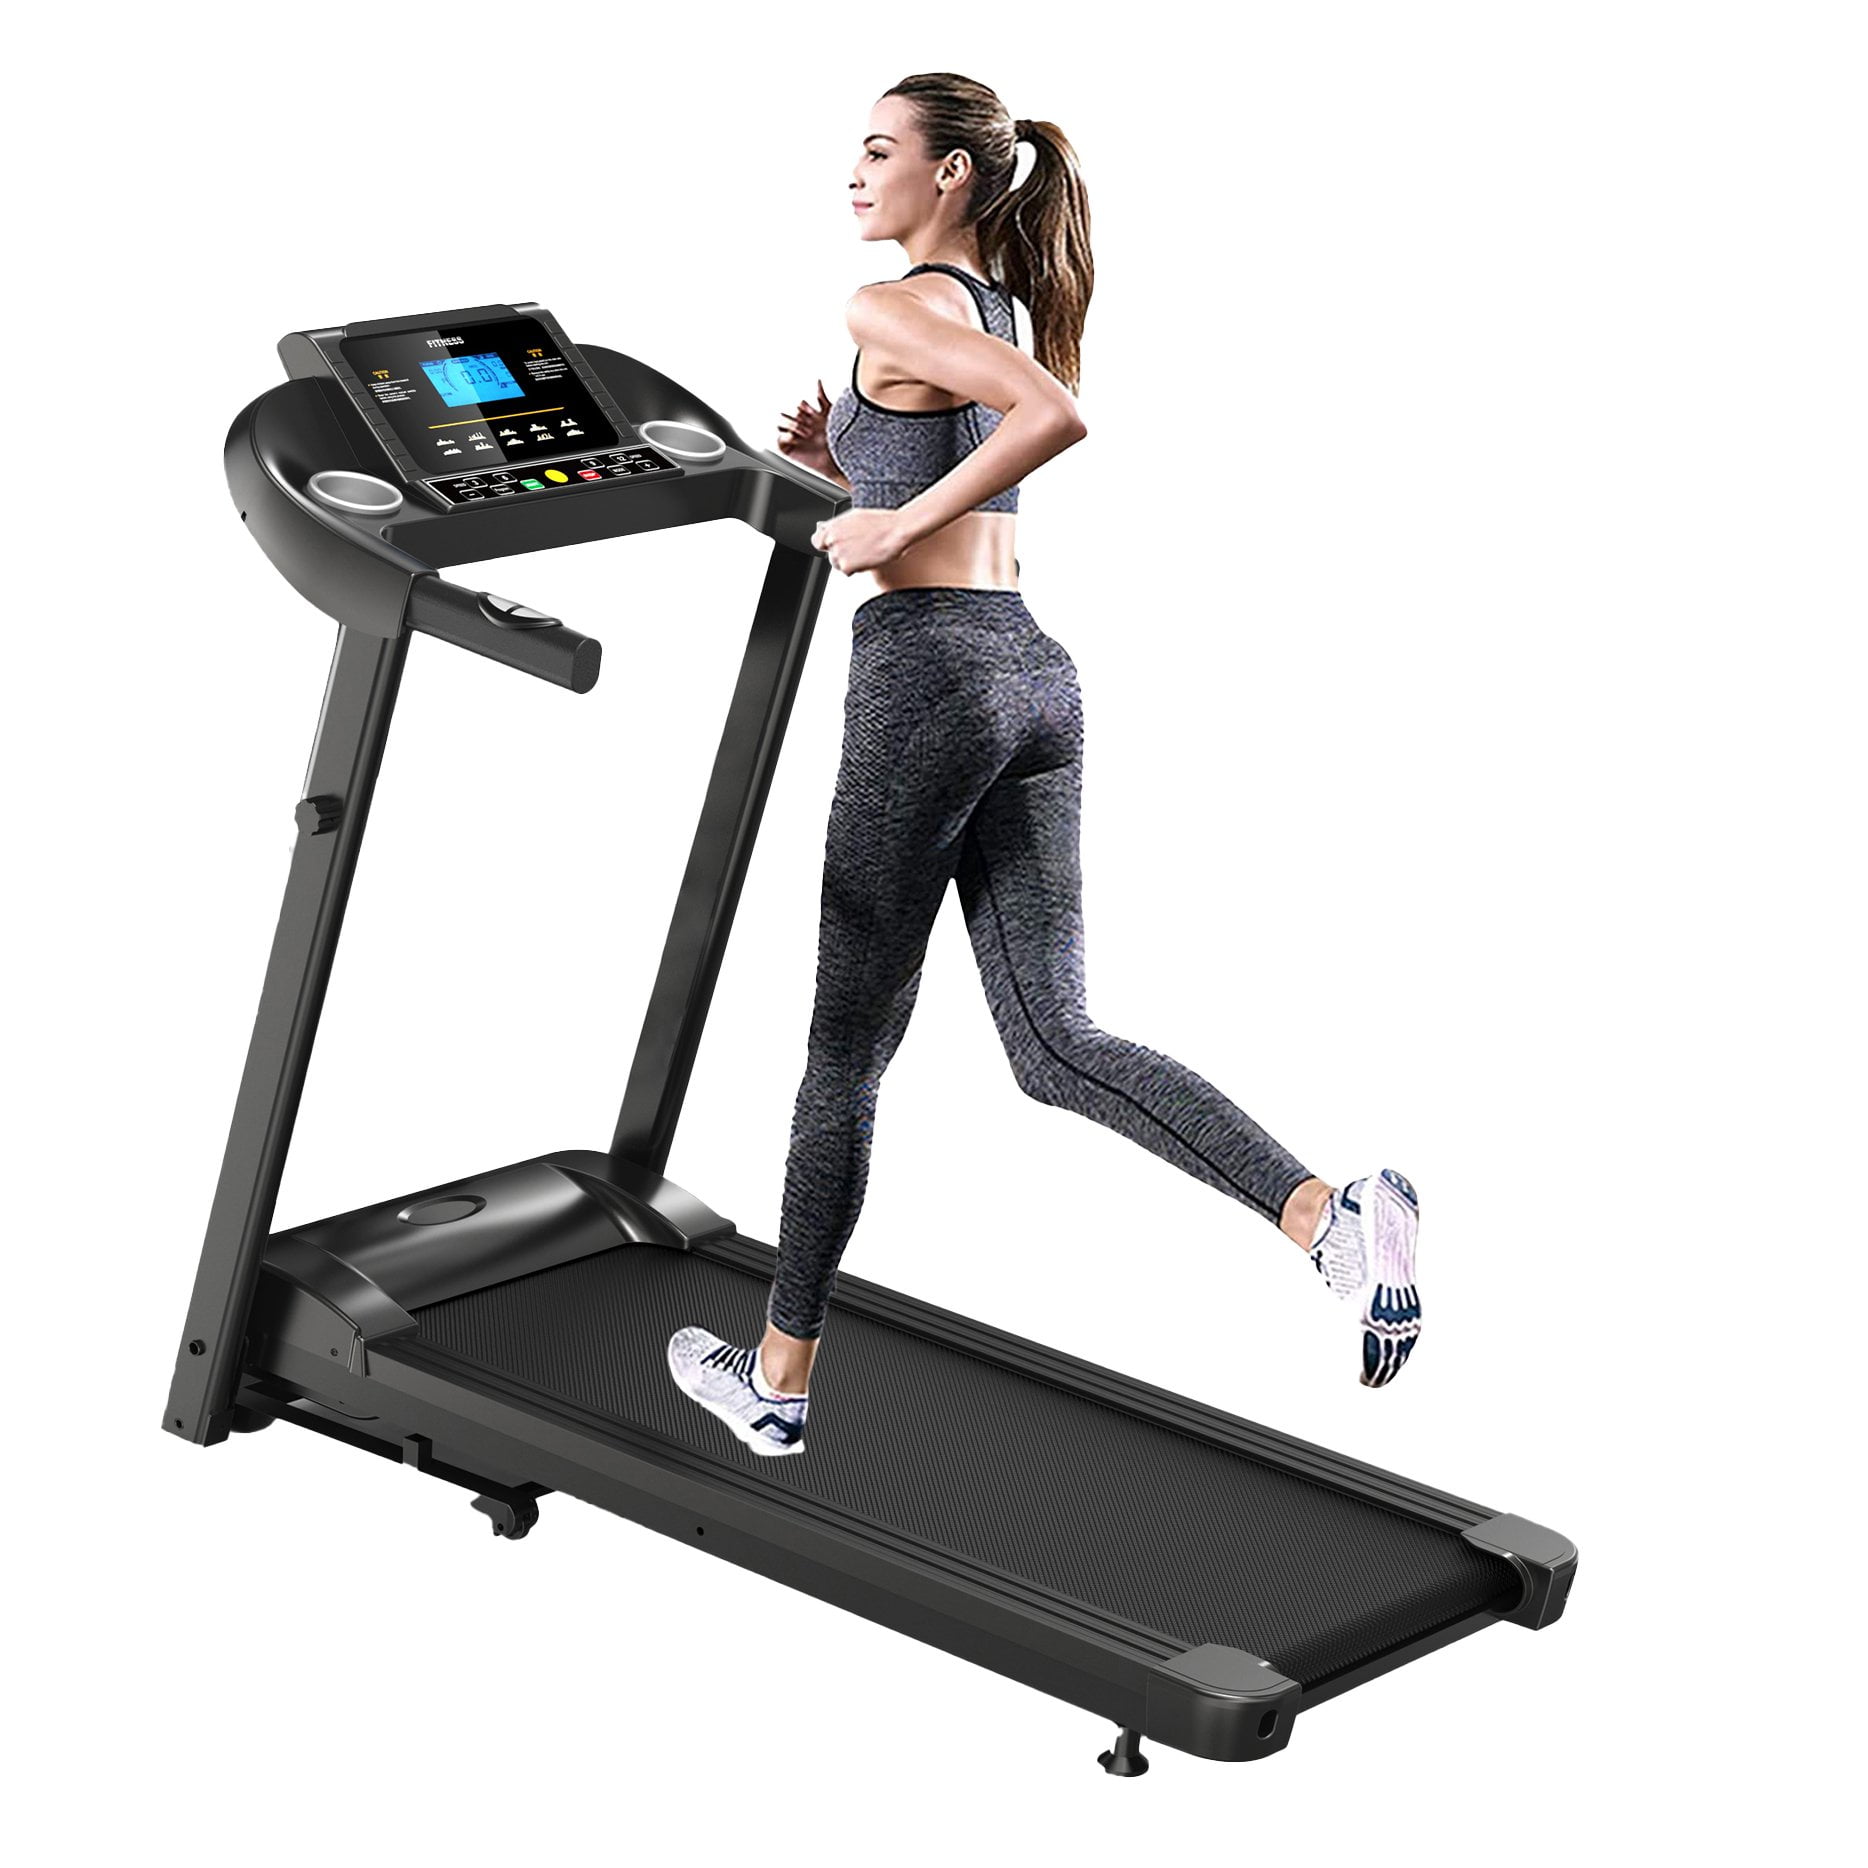 in. Tec mechanical treadmill with LCD Display Fitness Equipment Foldable Home Trainer 